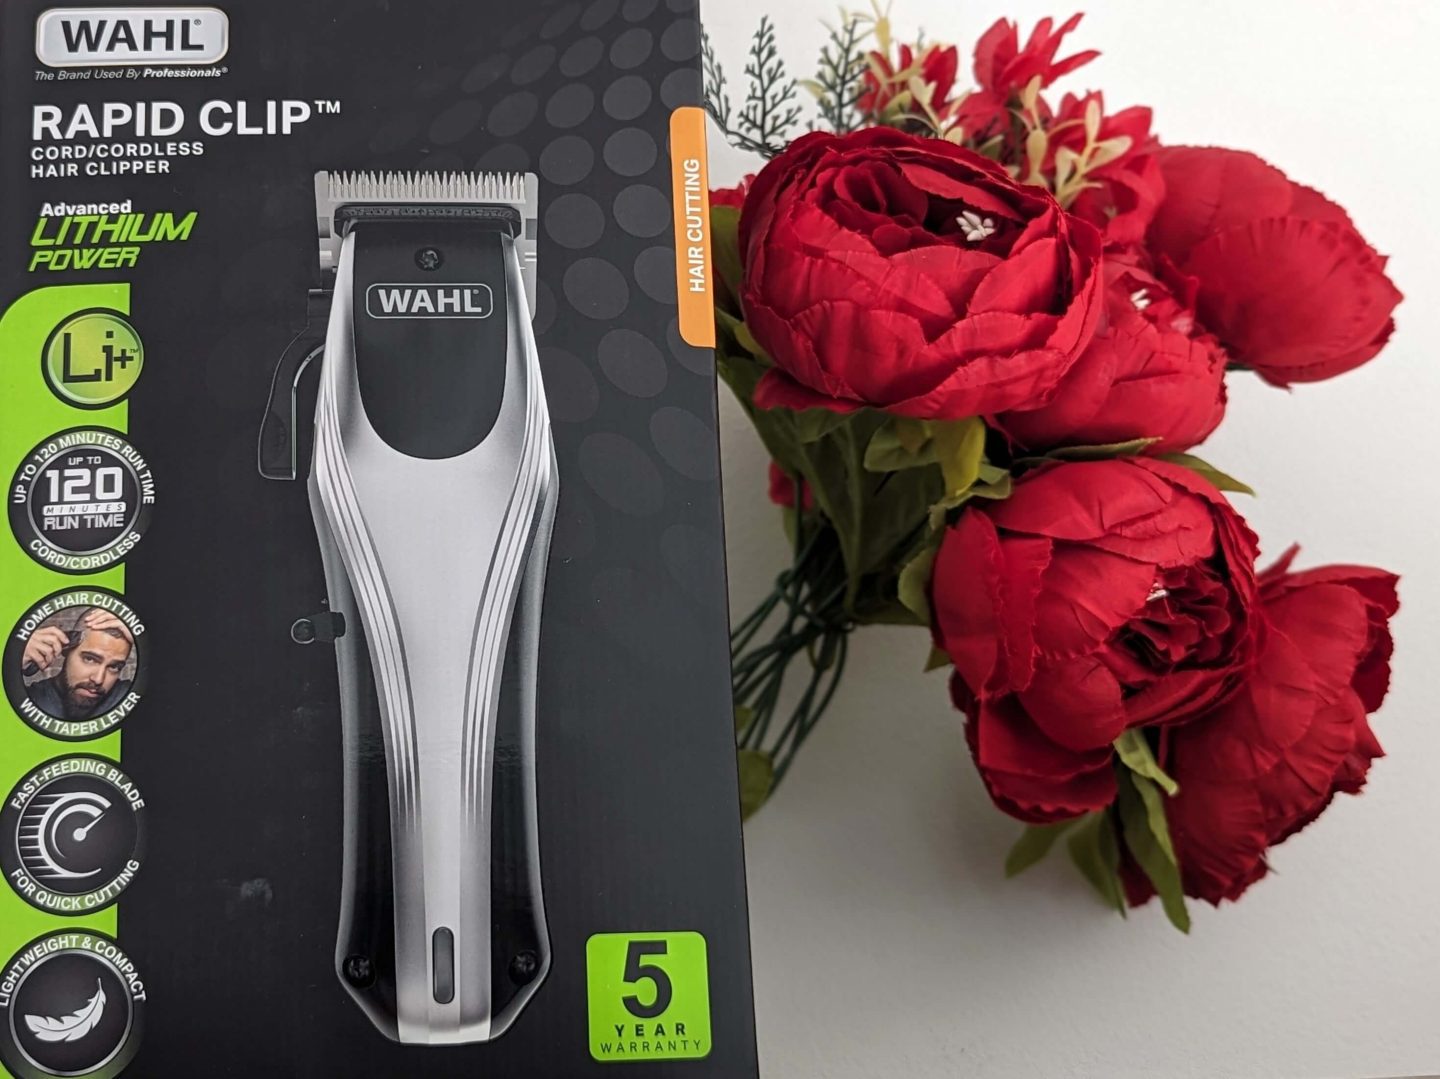 Wahl Rapid Clip Cord and Cordless Hair Clipper